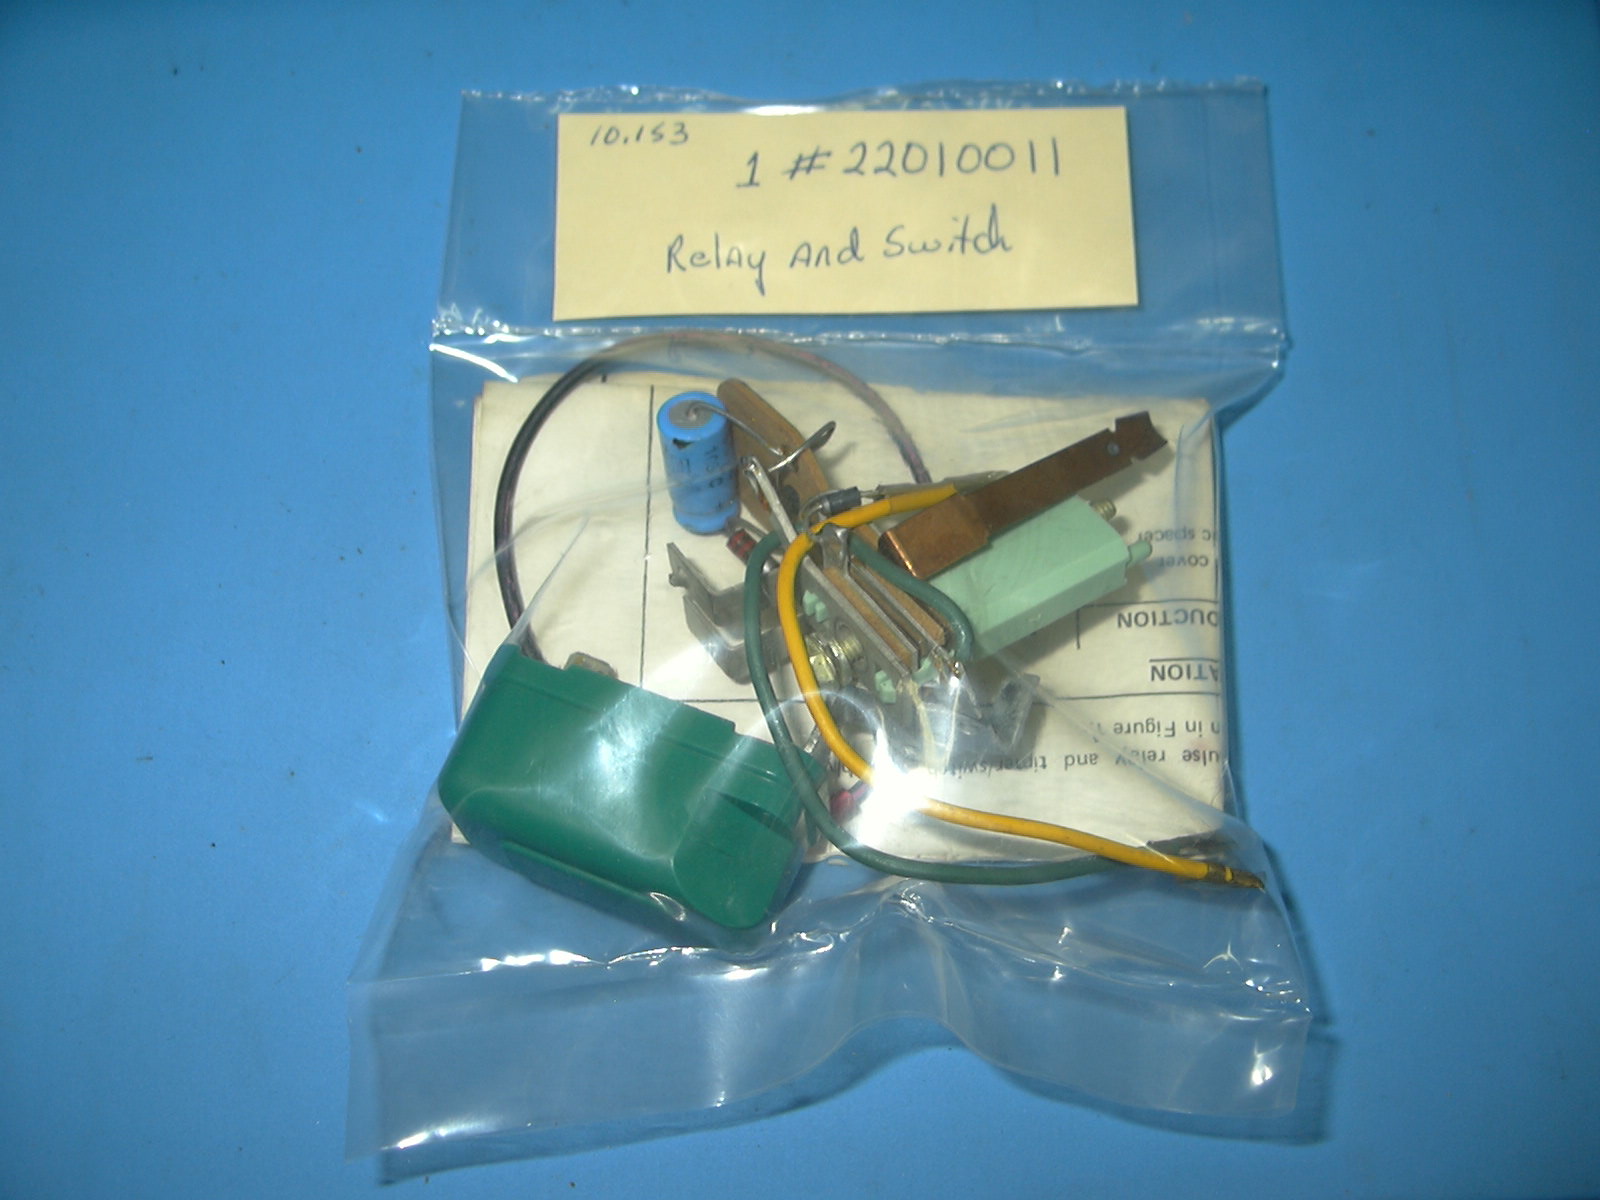 1976 - 1979 GM Windshield Wiper Relay and Switch NOS # 22010011 package